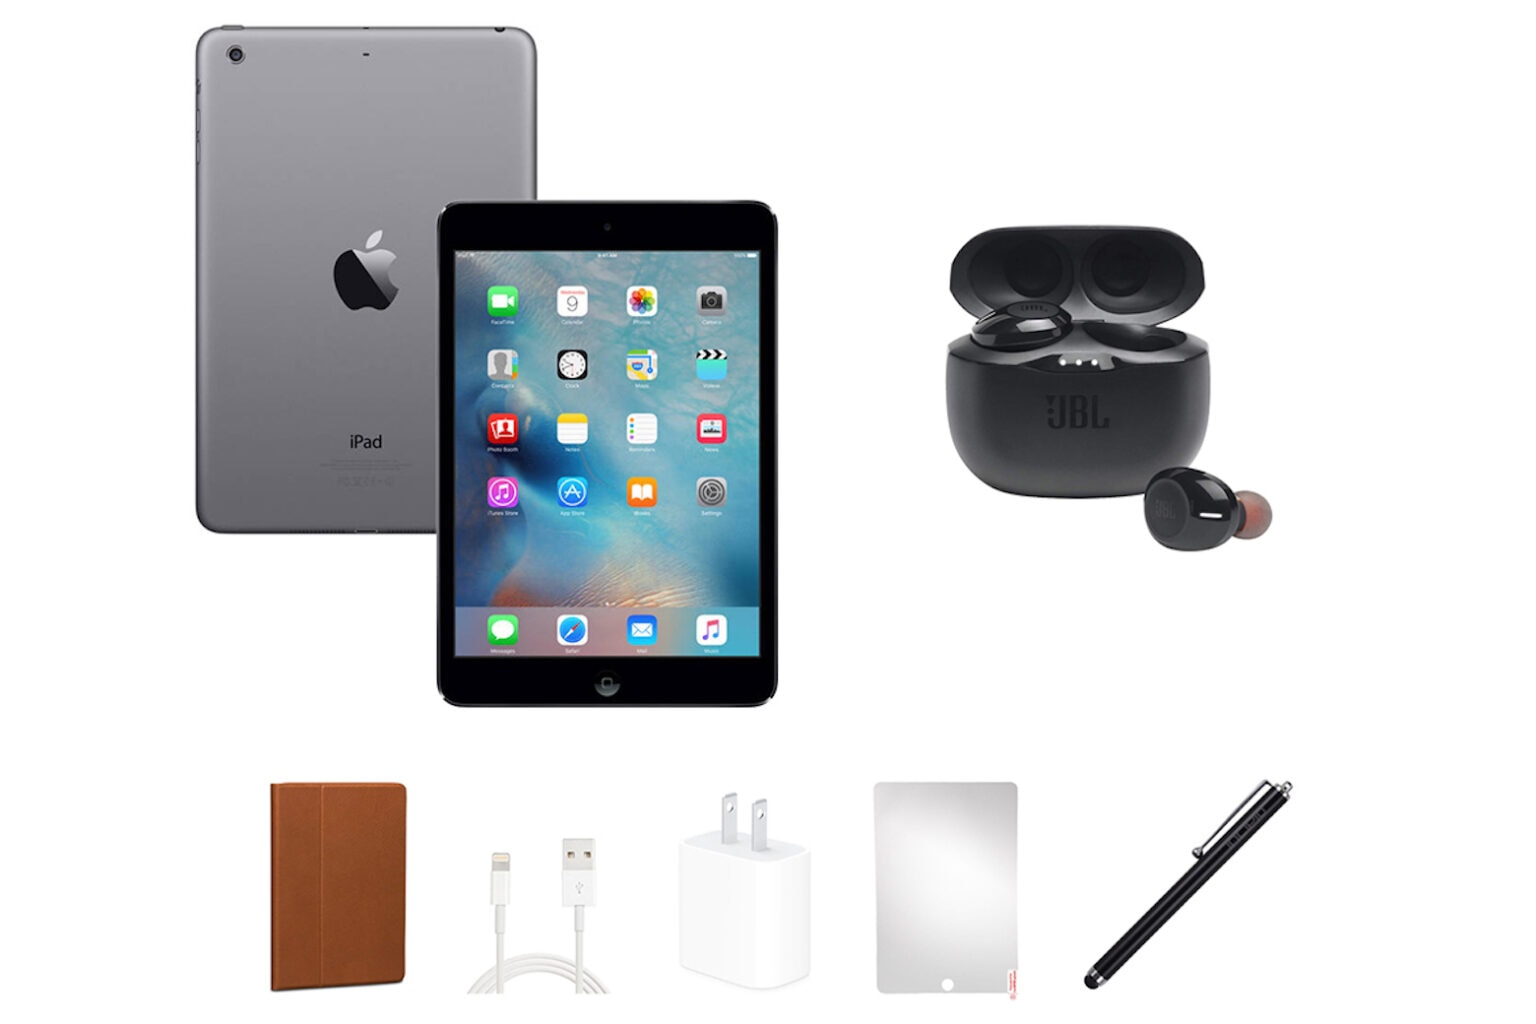 Celebrate Father's Day with this iPad Mini 2 and earbuds bundle.